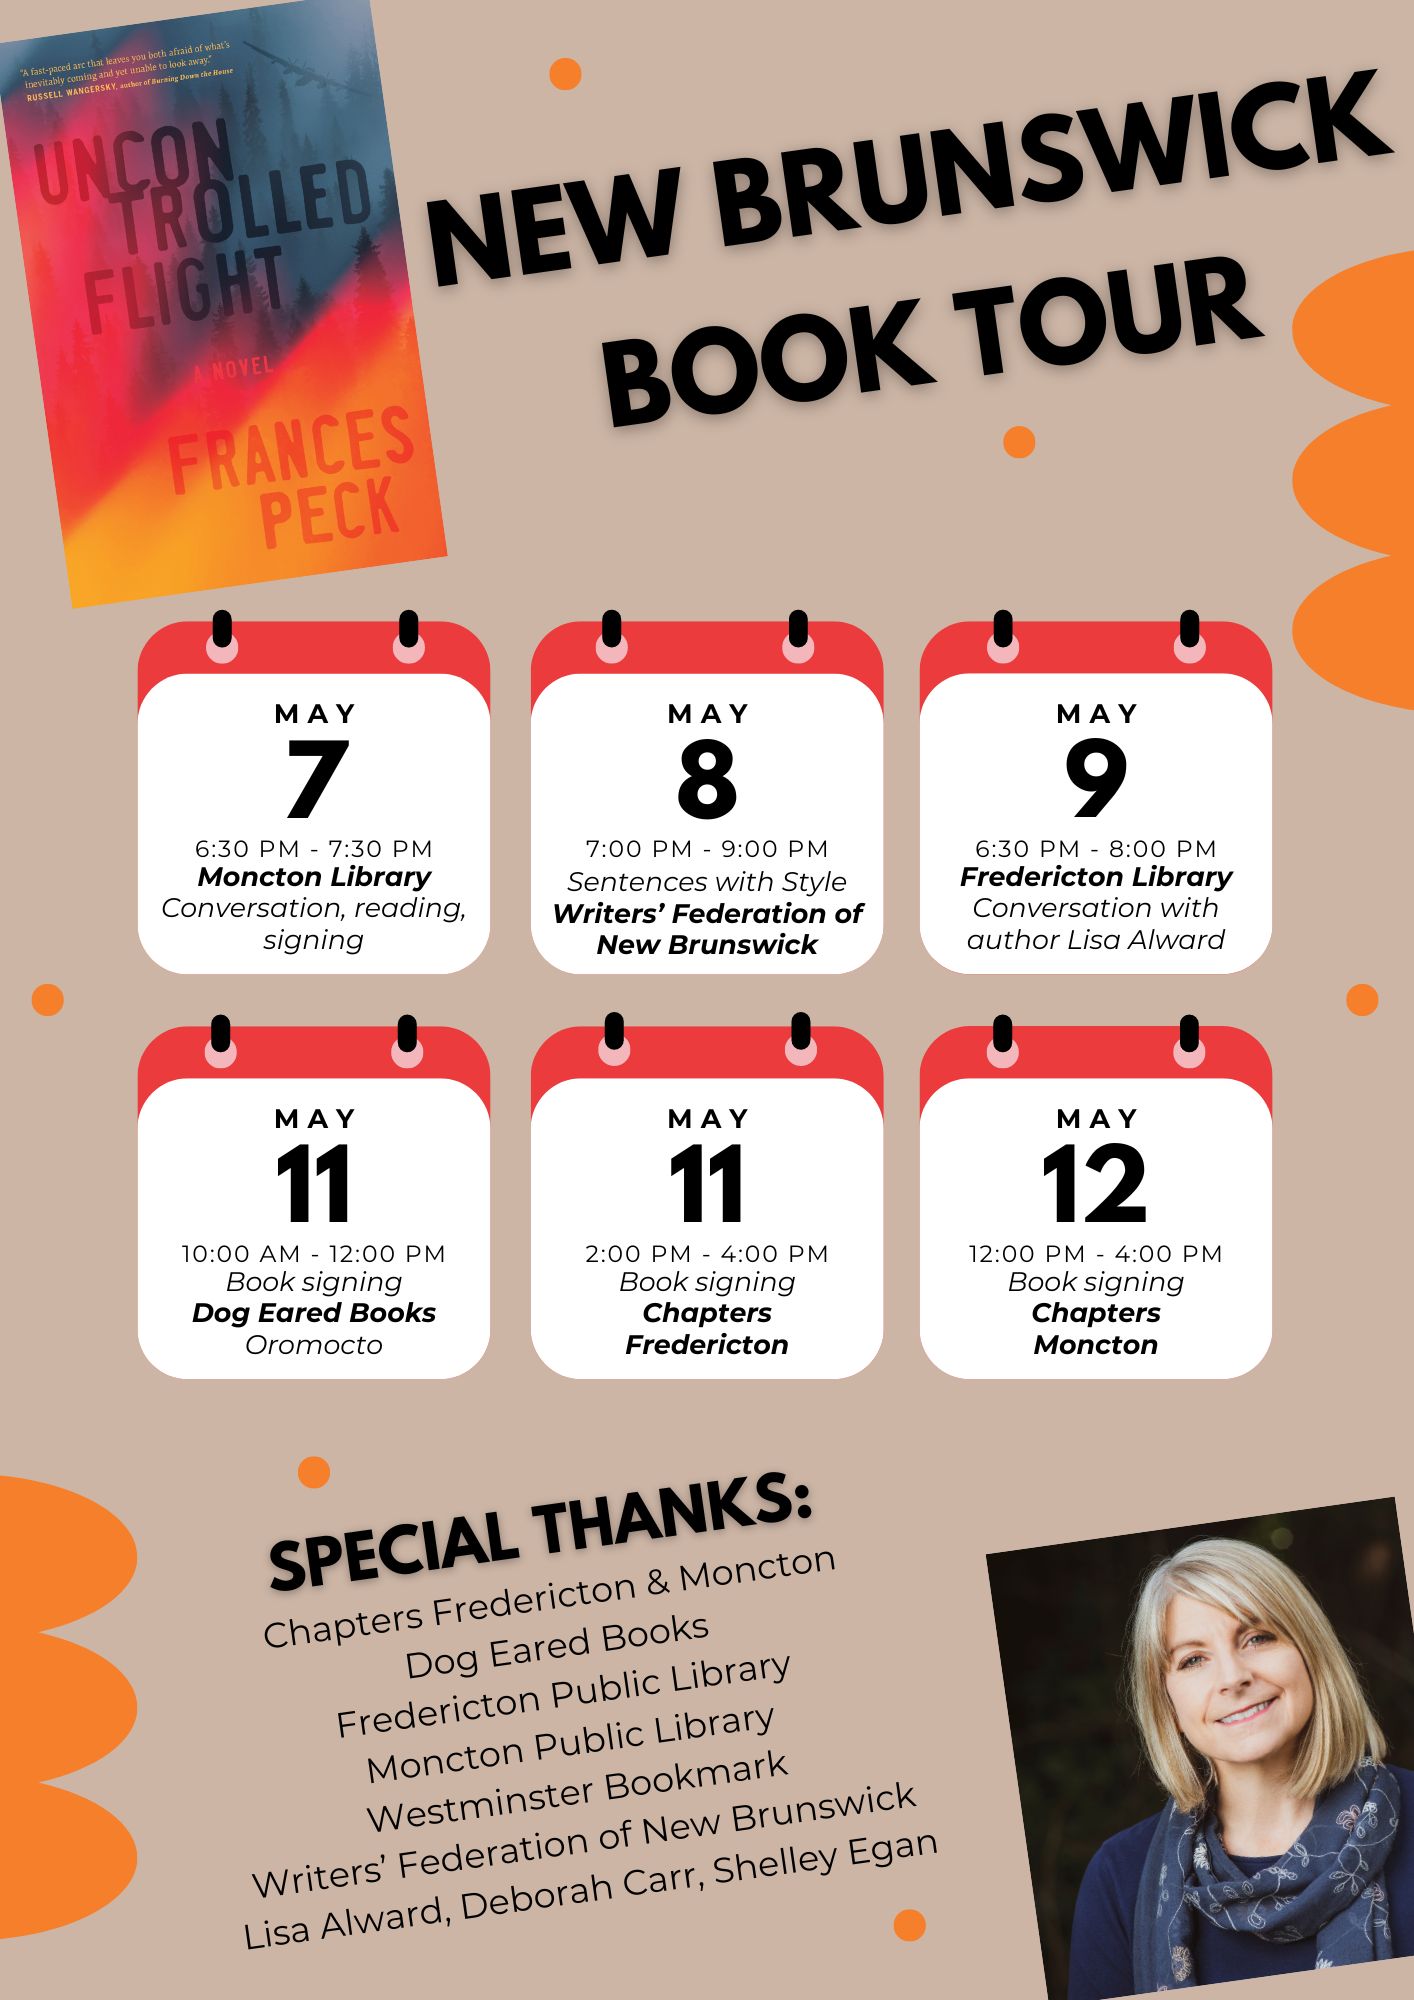 Poster for New Brunswick book tour for the novel Uncontrolled Flight. May 7, 6:30-7:30PM, Moncton Library. May 8, 7:00-9:00PM, workshop for Writers' Federation of New Brunswick. May 9, 6:30-8:00PM, Fredericton Library. May 11, 10:00AM-12:00PM, signing at Dog Eared Books, Oromocto. May 11, 2:00-4:00PM, signing at Chapters Fredericton. May 12, 12:00-4:00PM, signing at Chapters Moncton.